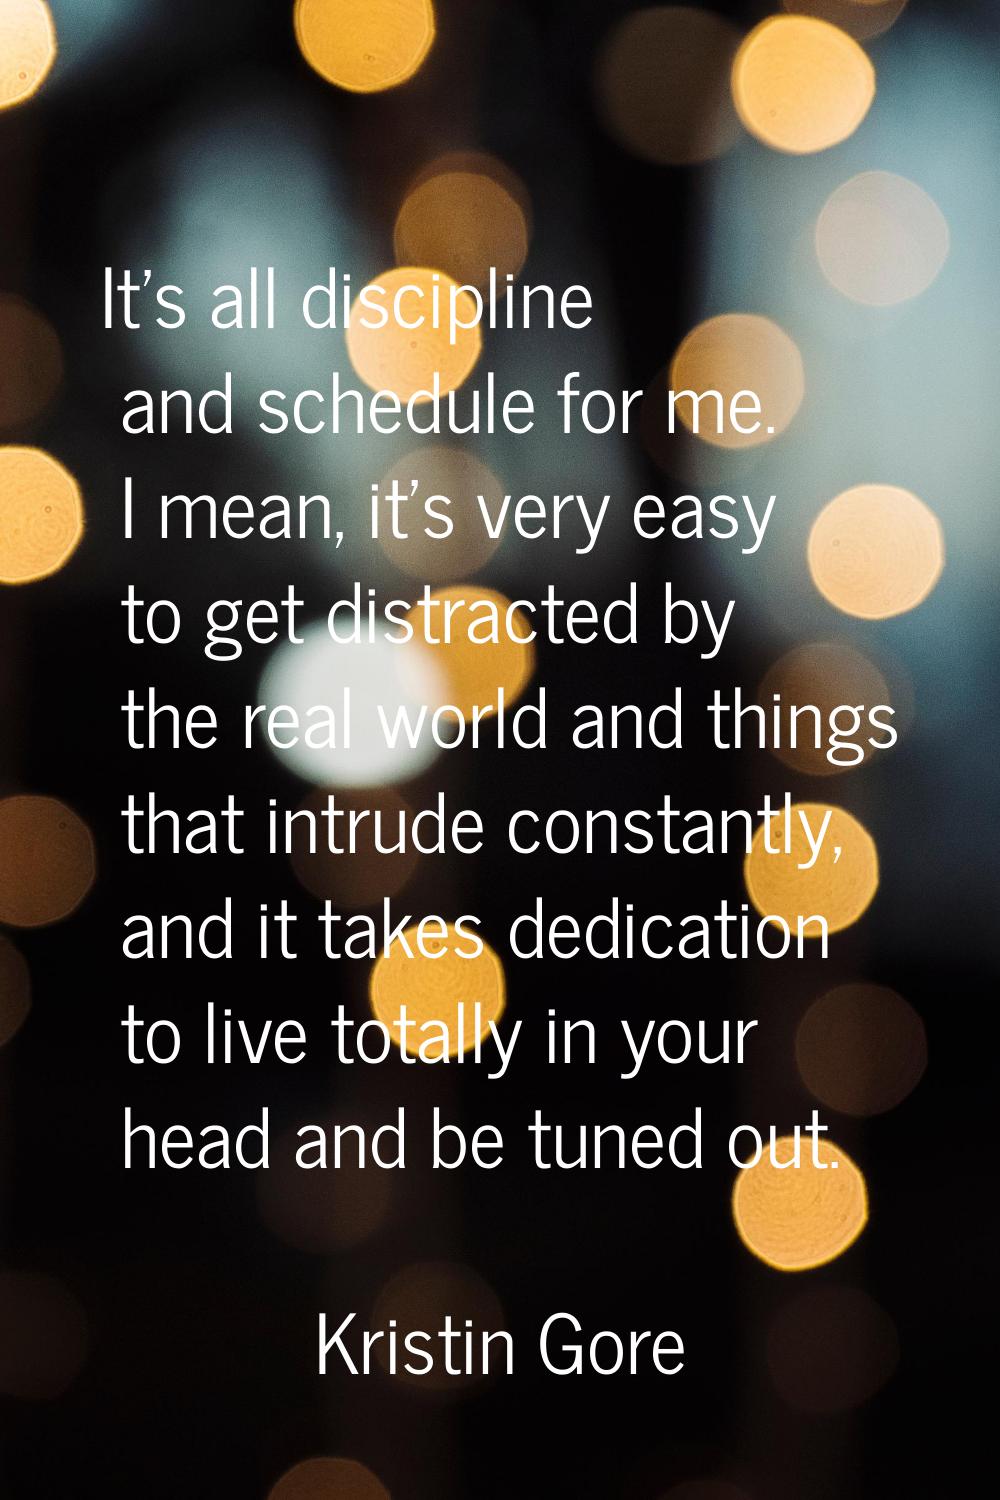 It's all discipline and schedule for me. I mean, it's very easy to get distracted by the real world